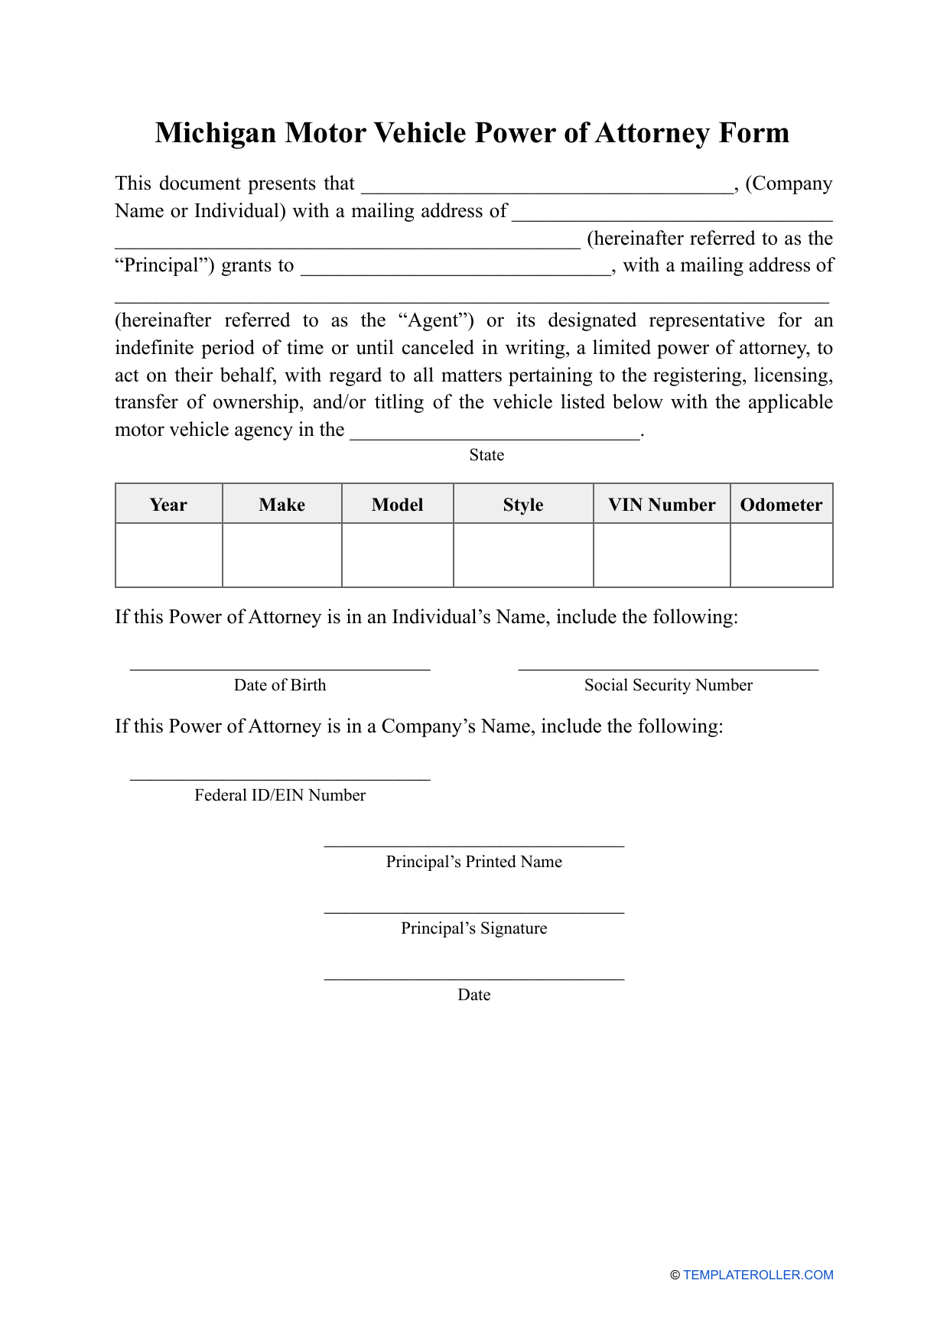 Motor Vehicle Power of Attorney Form - Michigan, Page 1